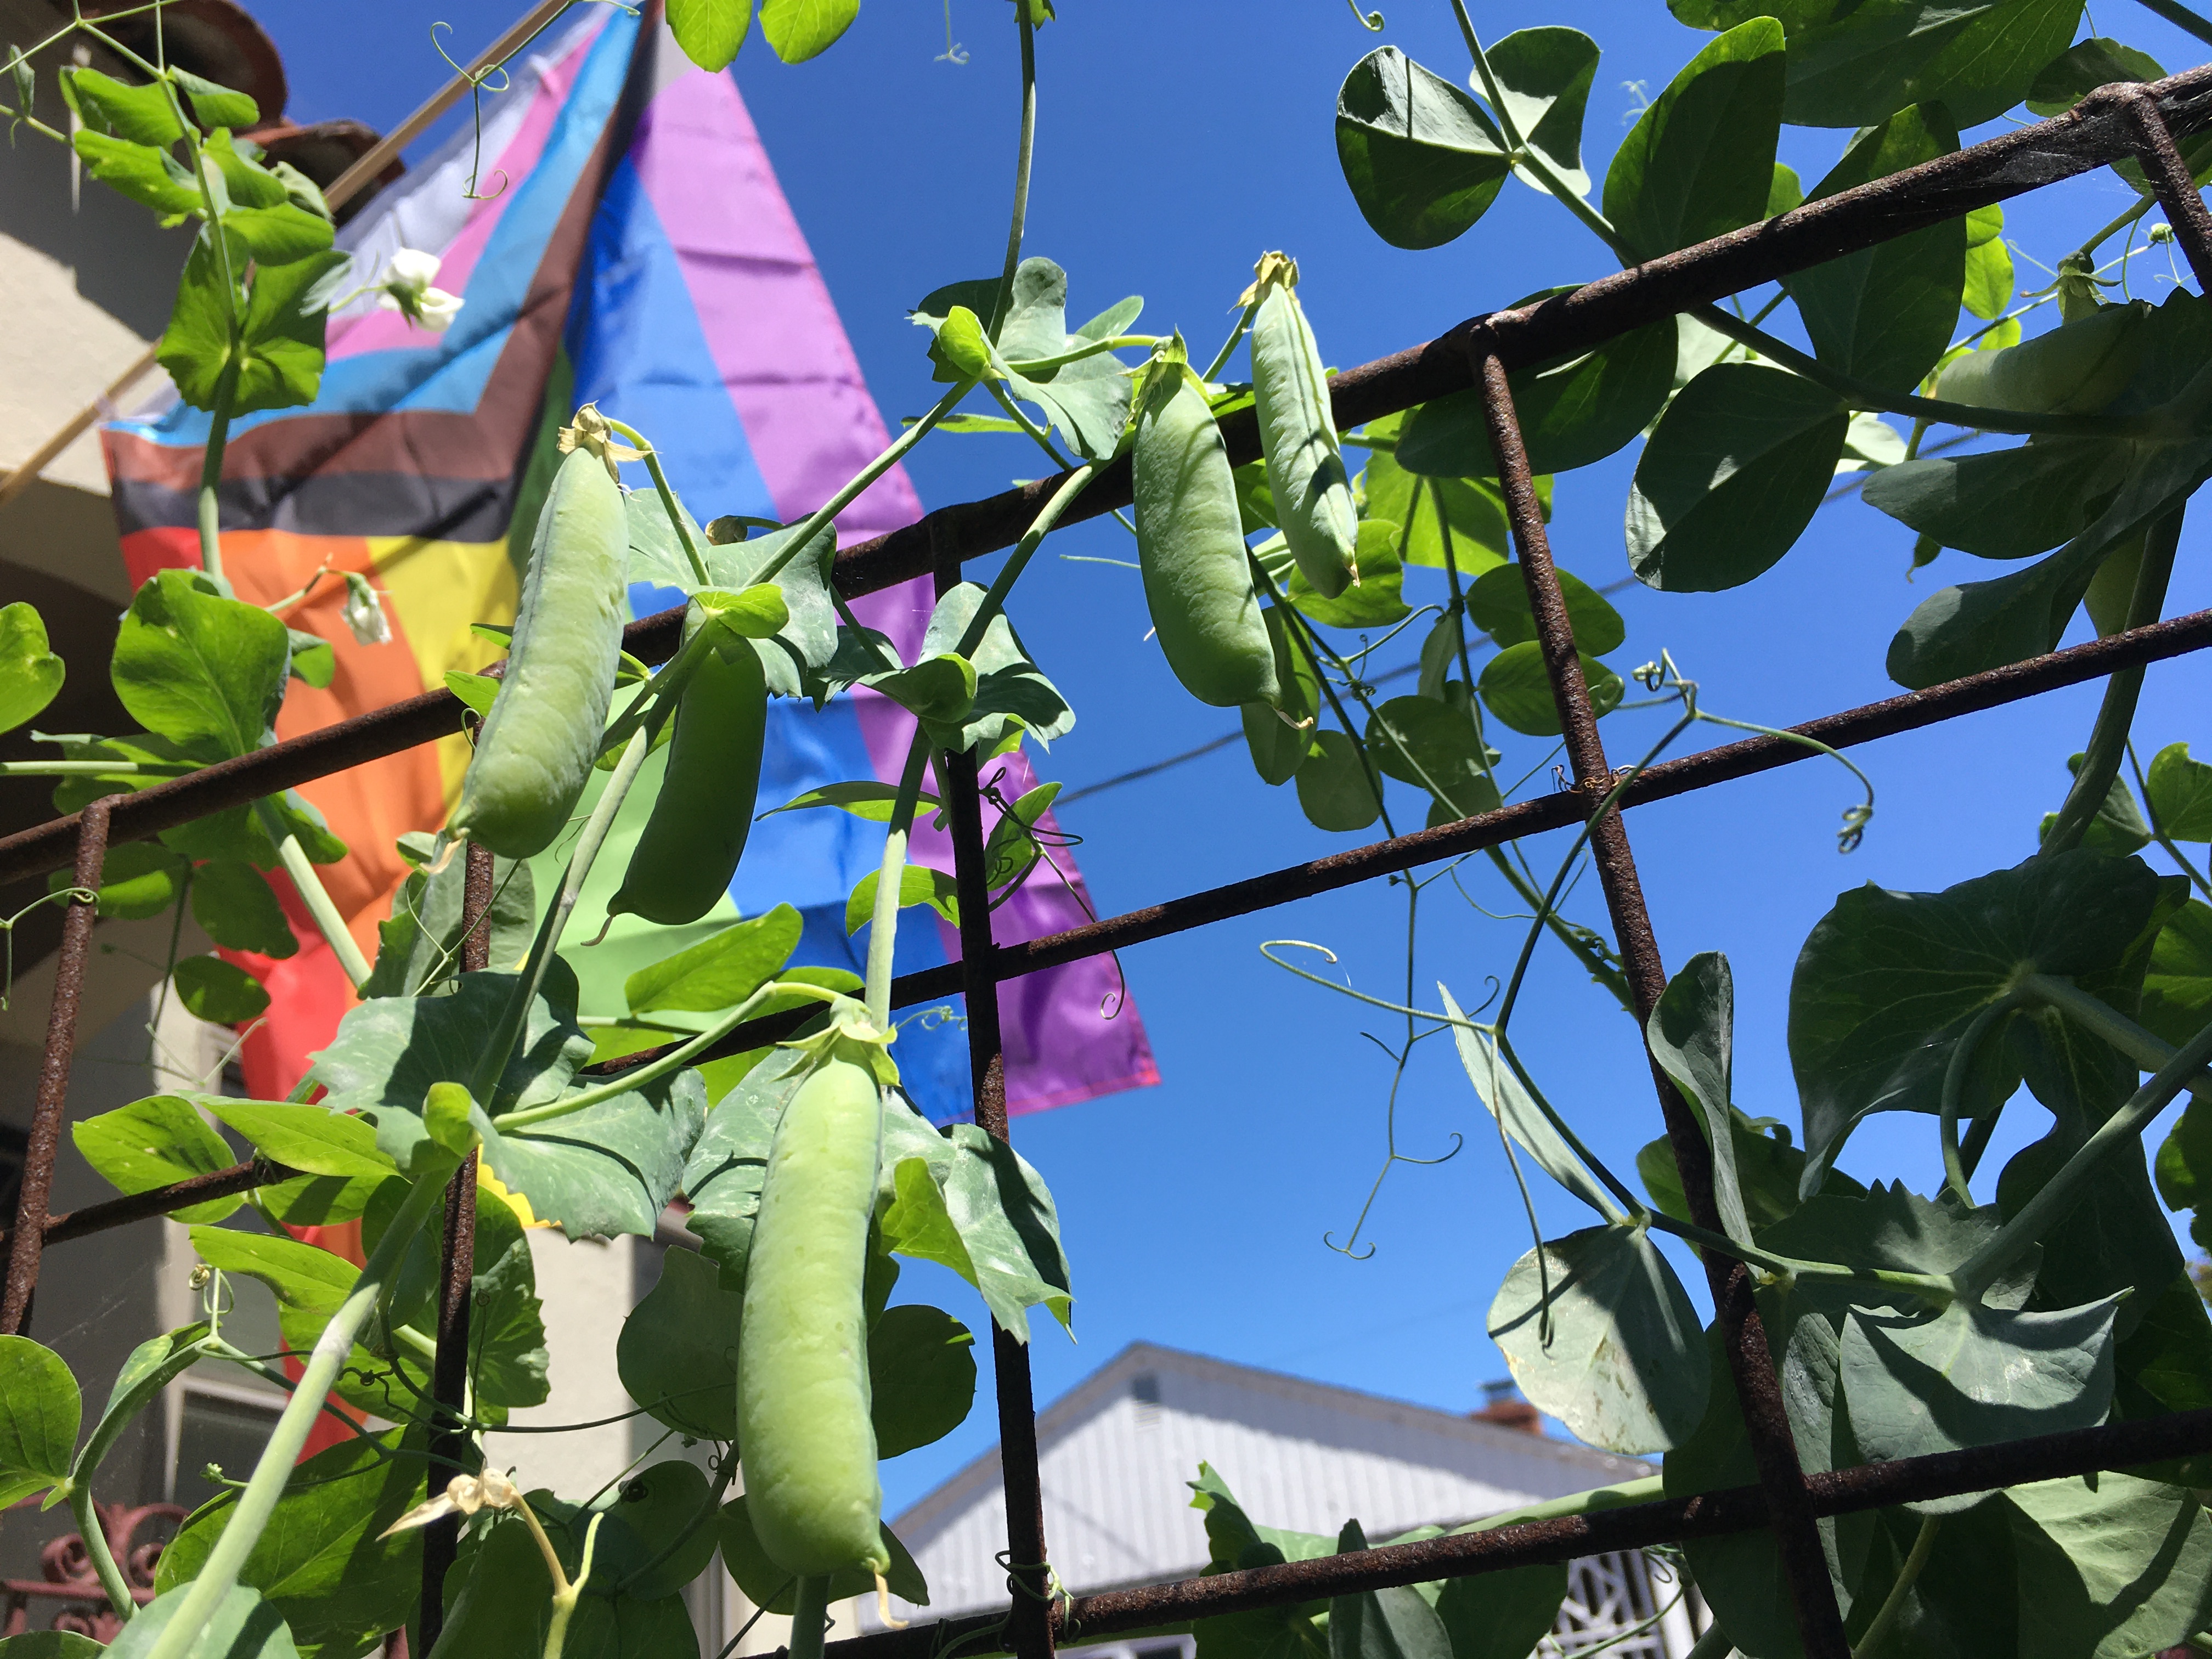 Photo of pea pods growing, with a pride flag in the background